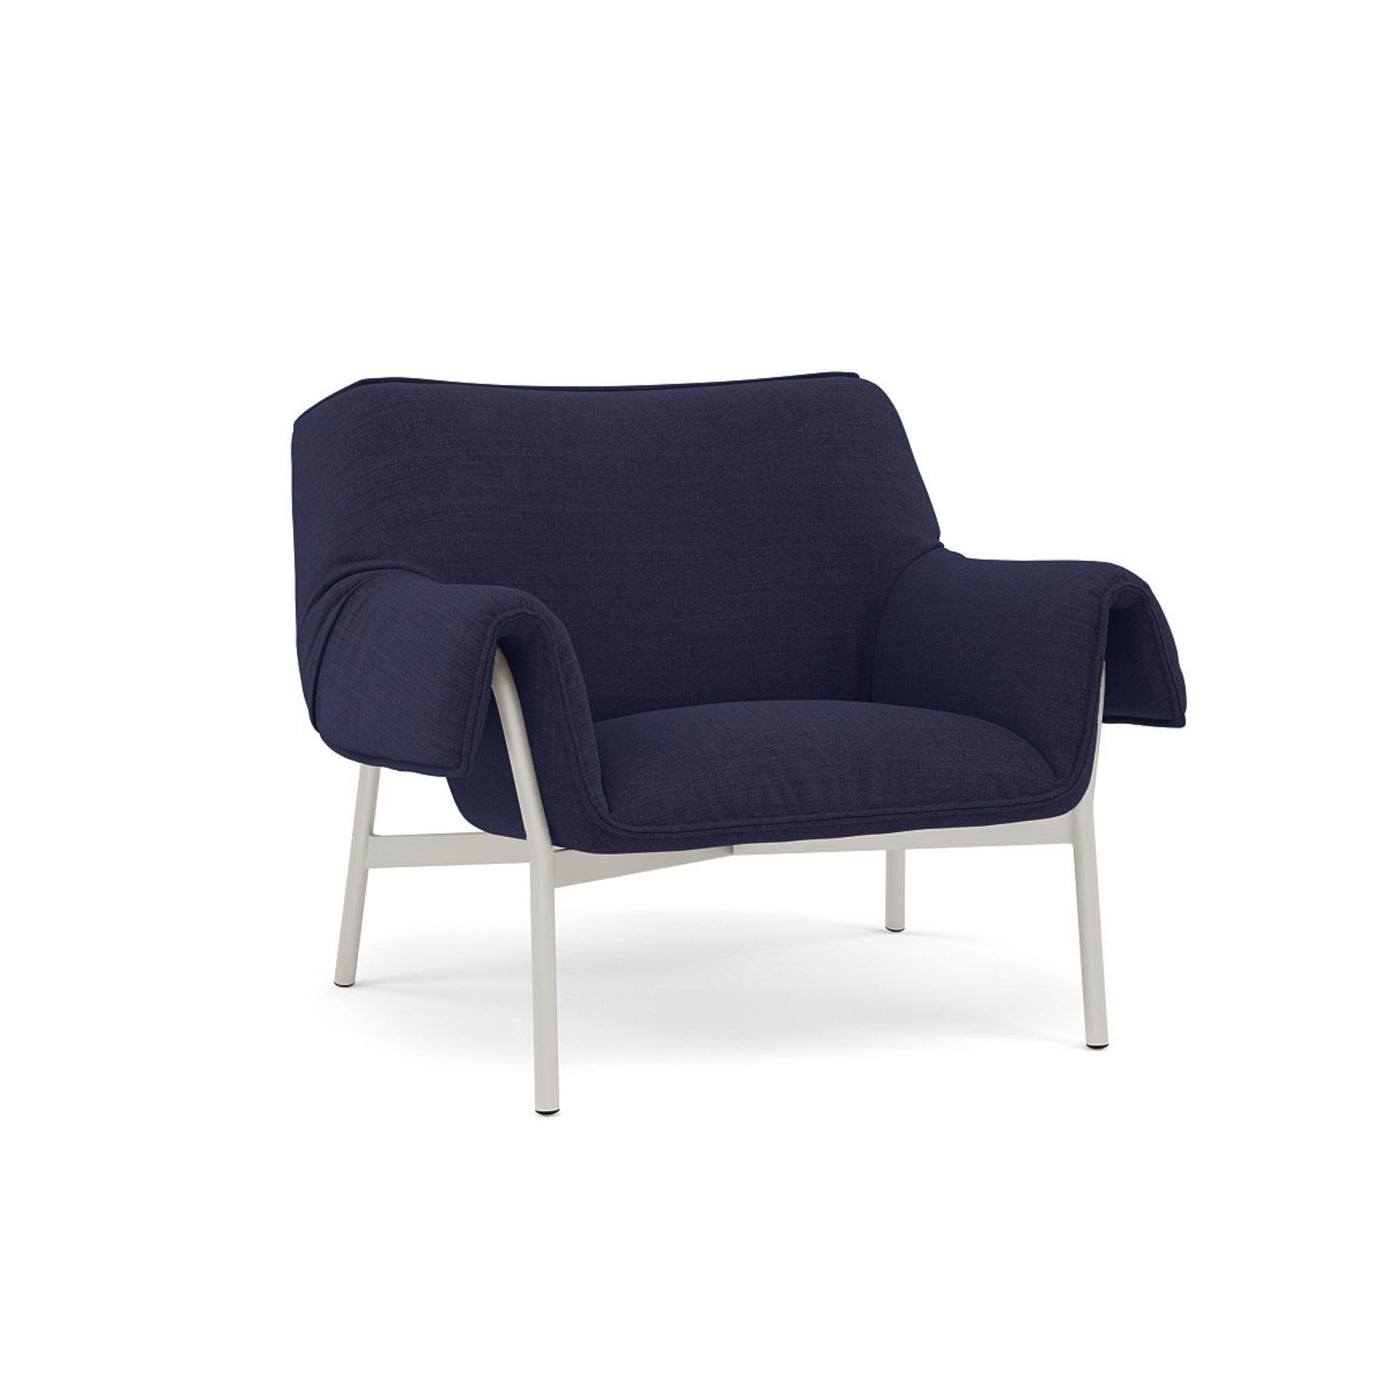 Muuto Wrap Lounge Chair. Made to order from someday designs. #colour_canvas-684-blue